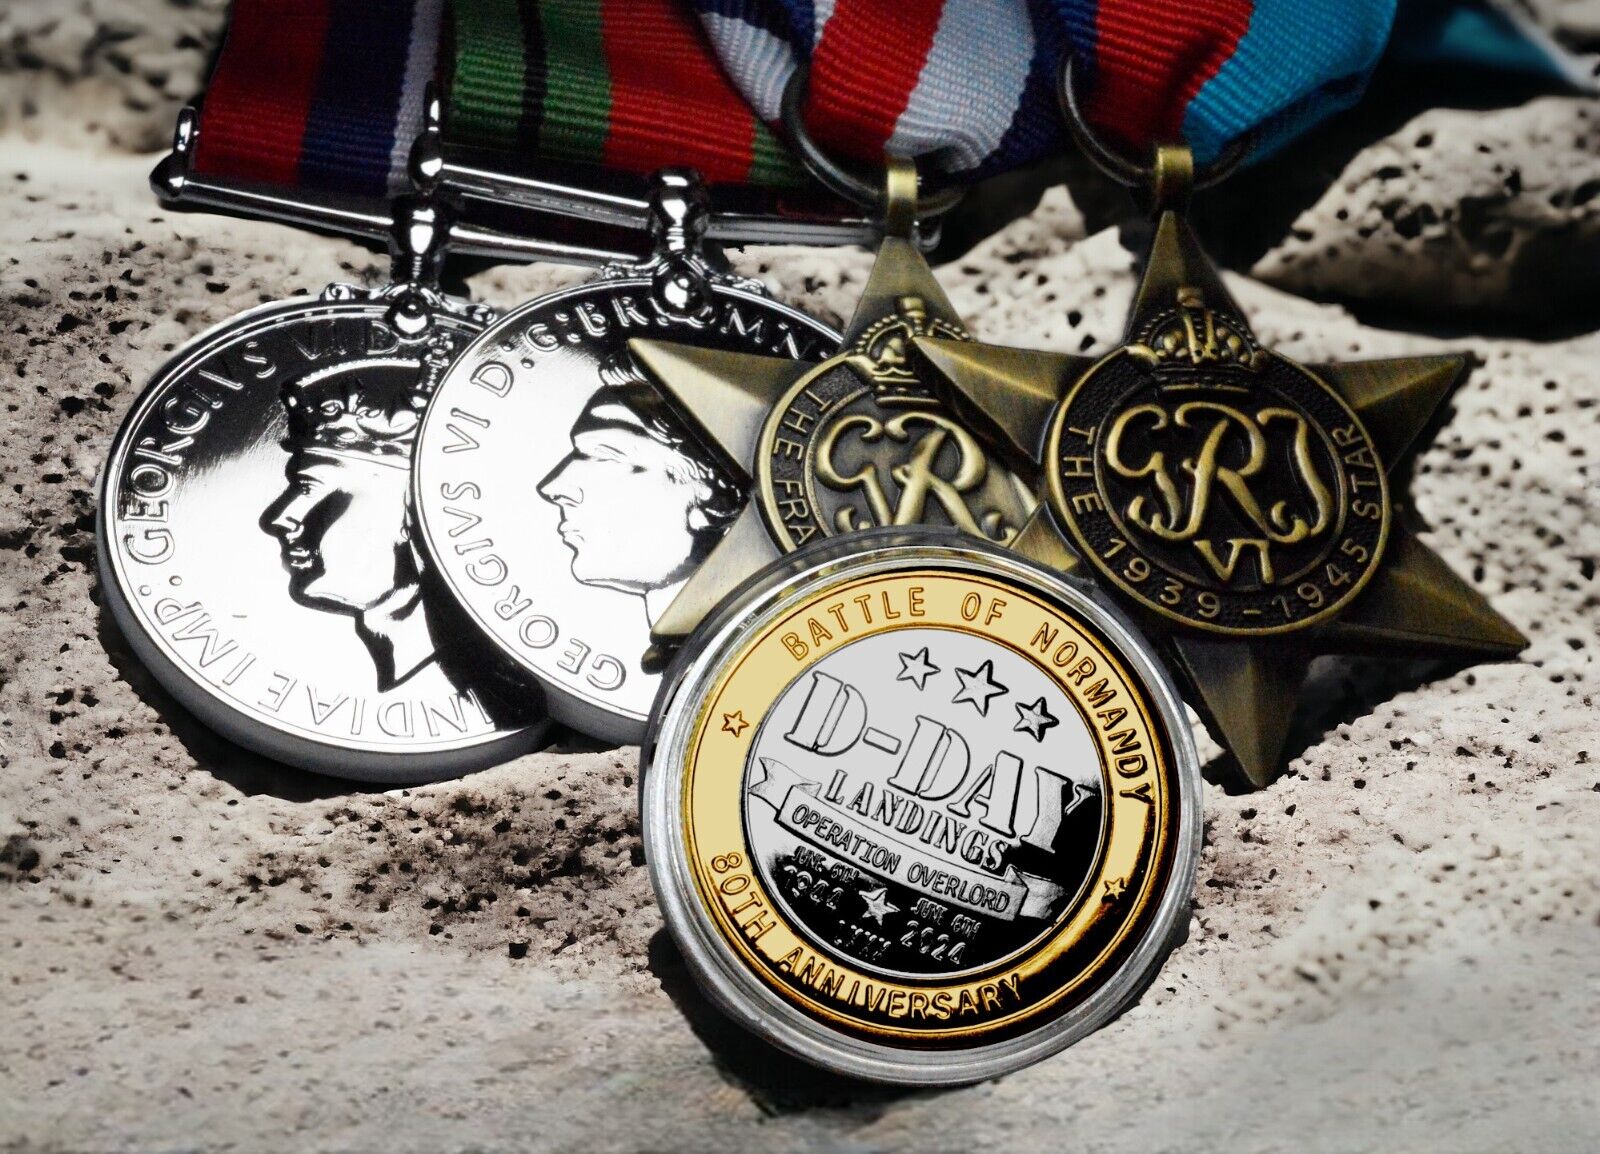 D-DAY LANDINGS 80th Anniversary Commemorative Coin & WW2 Campaign Medal Set.